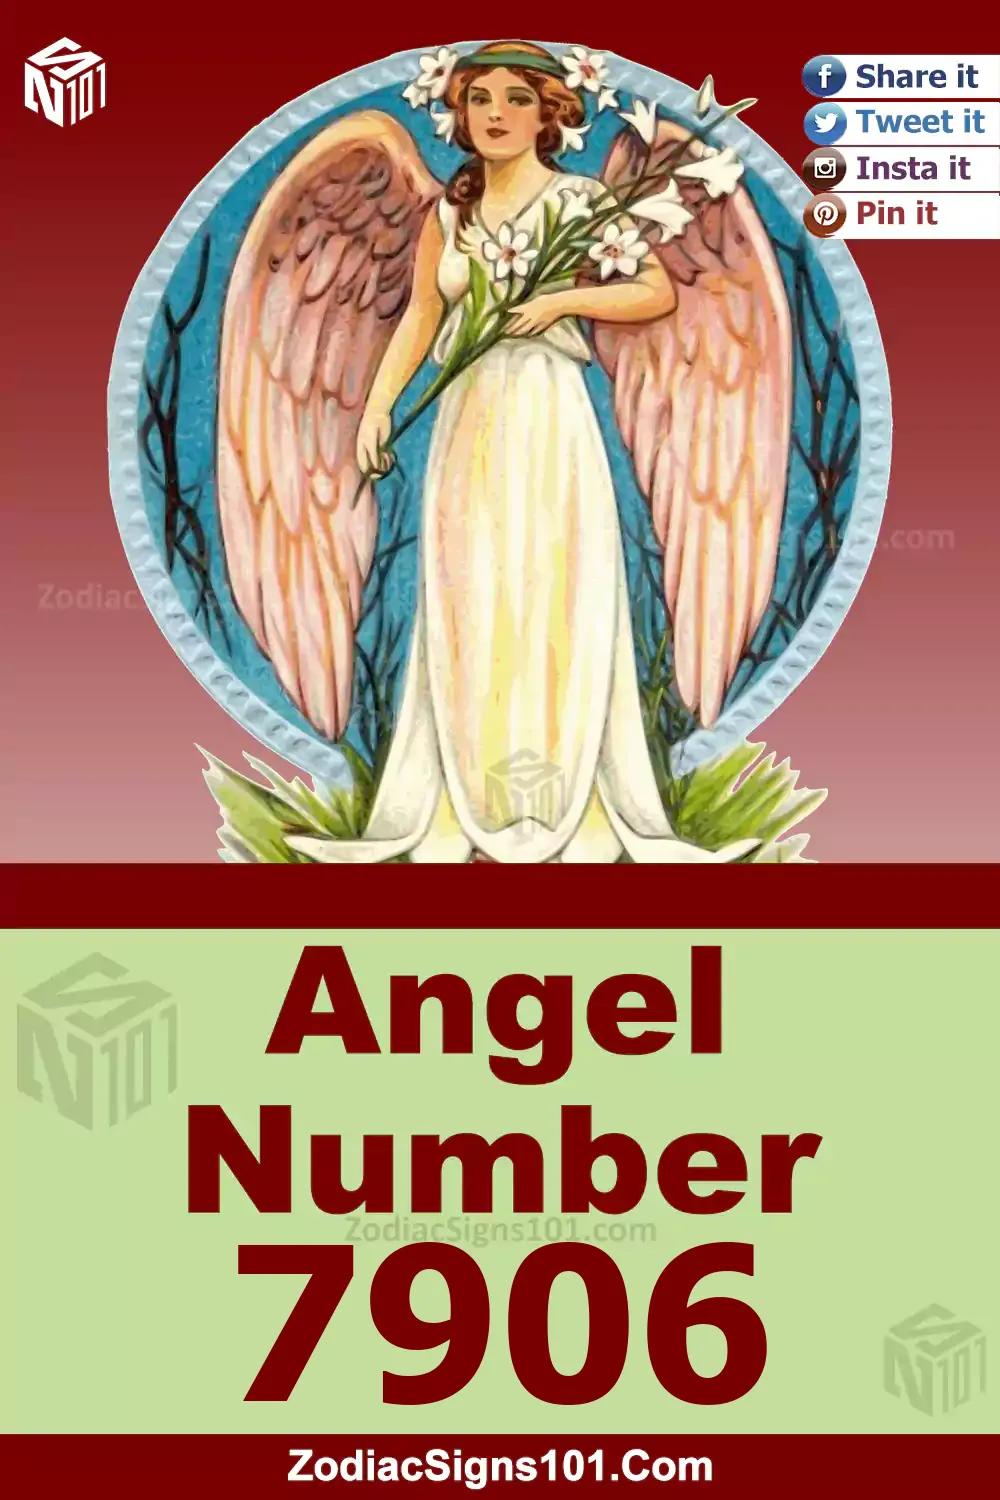 7906 Angel Number Meaning